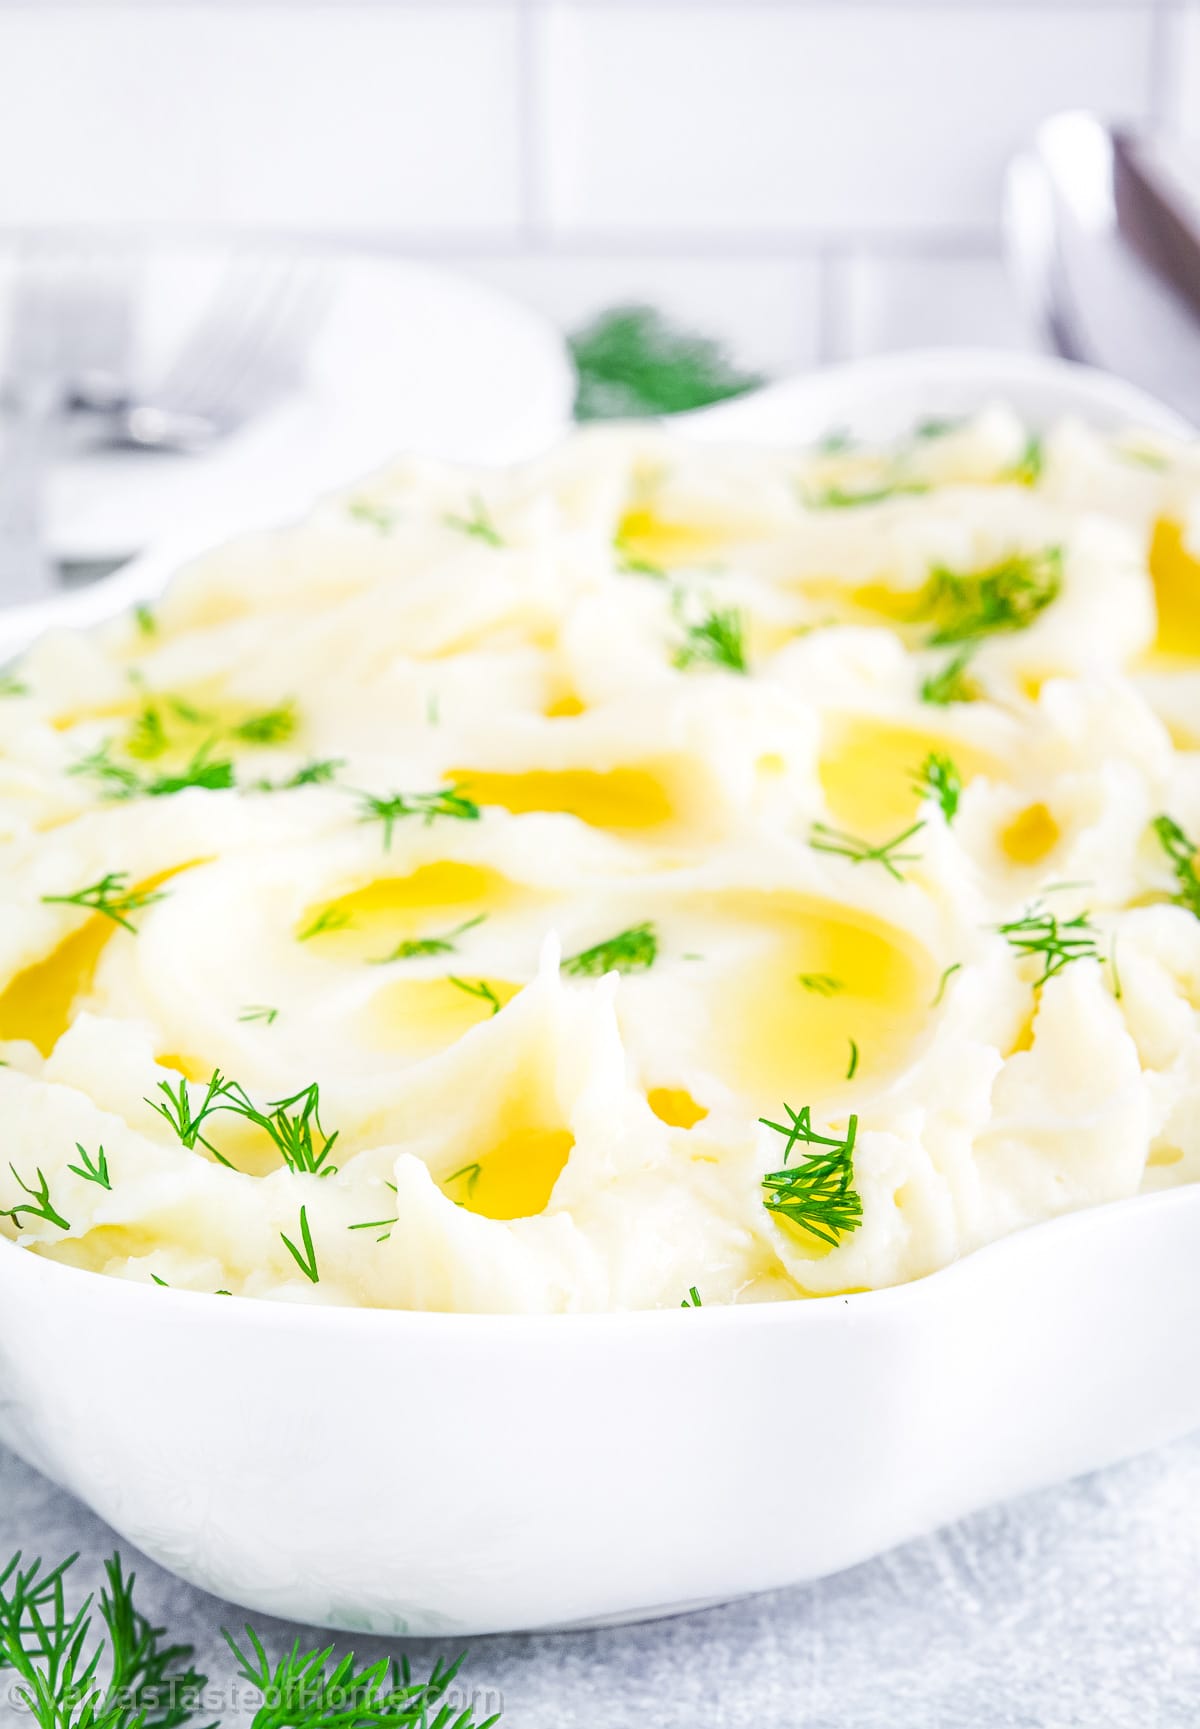 There's something heartwarming about a bowl of Mashed Potato Puree. The creamy texture, the rich flavor of the russets, the salty tang of the butter, and the smoothness of the cream cheese and heavy cream all come together to create a side dish that's nothing short of heavenly.